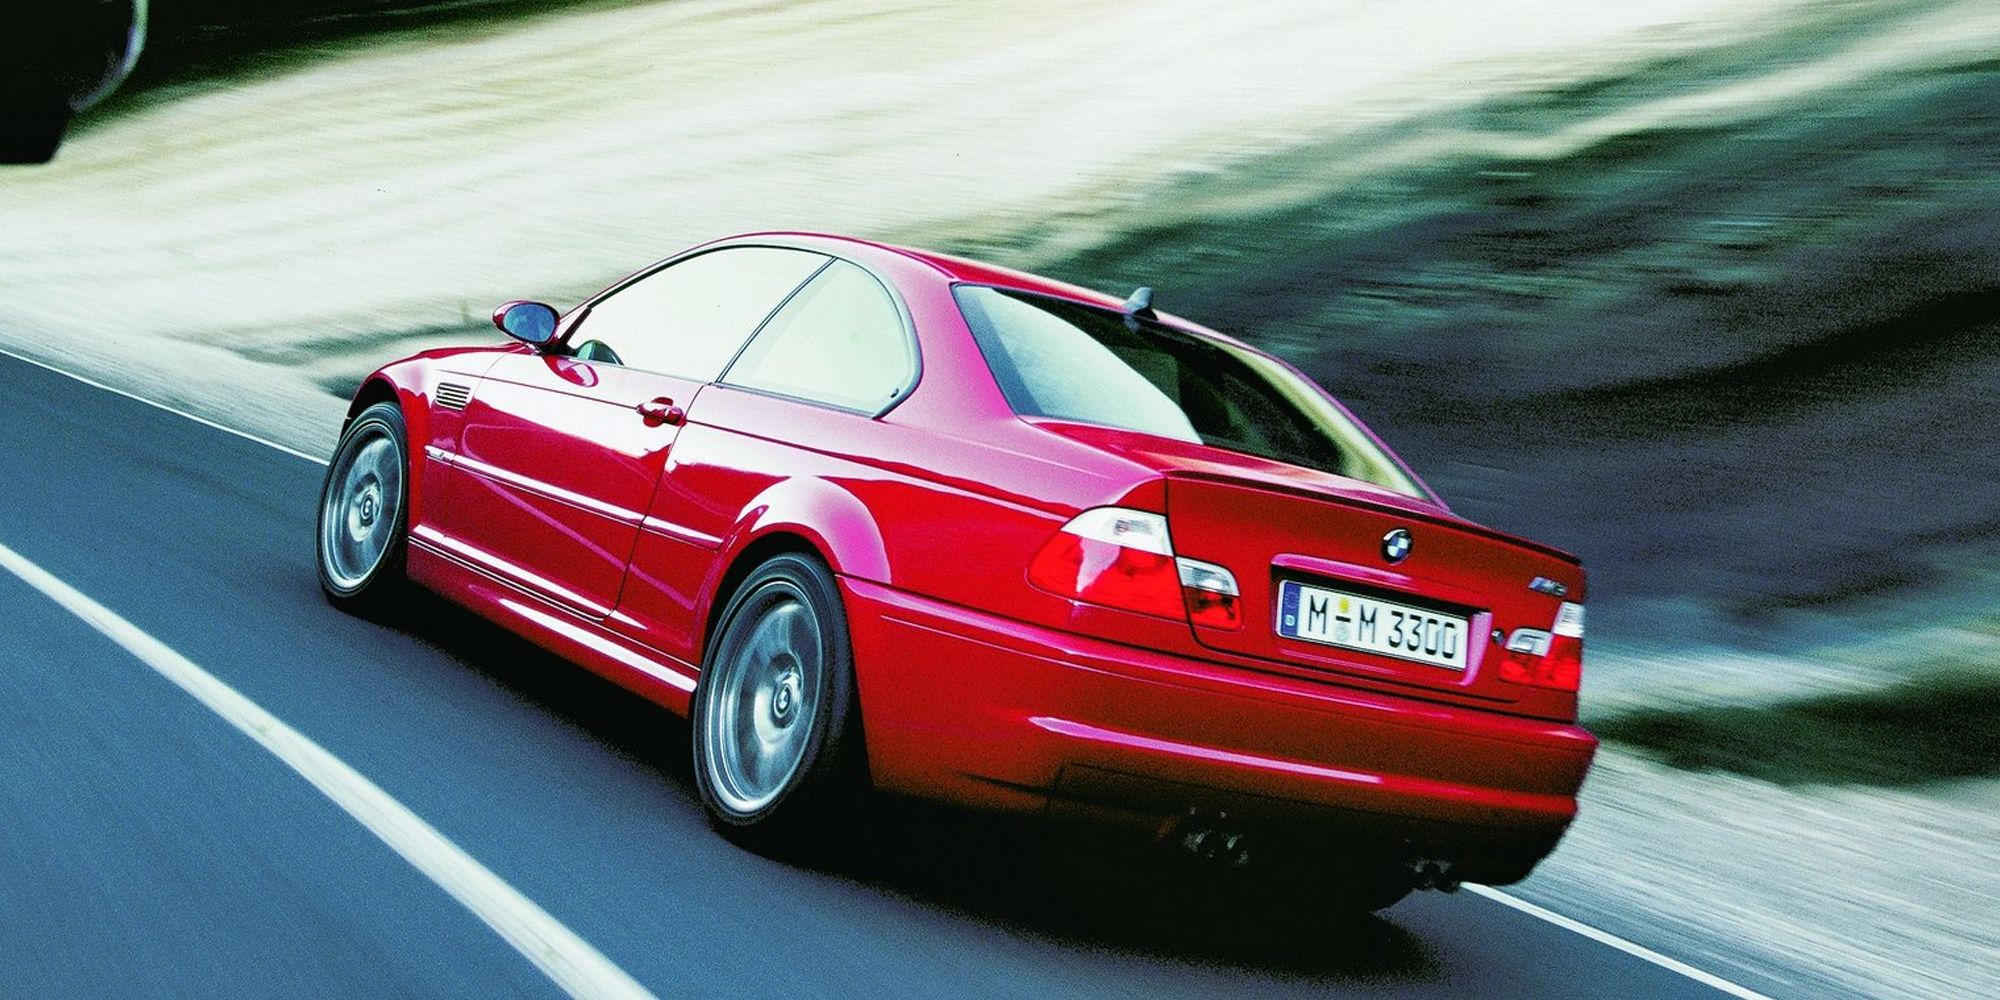 Rear 3/4 view of a red E46 M3